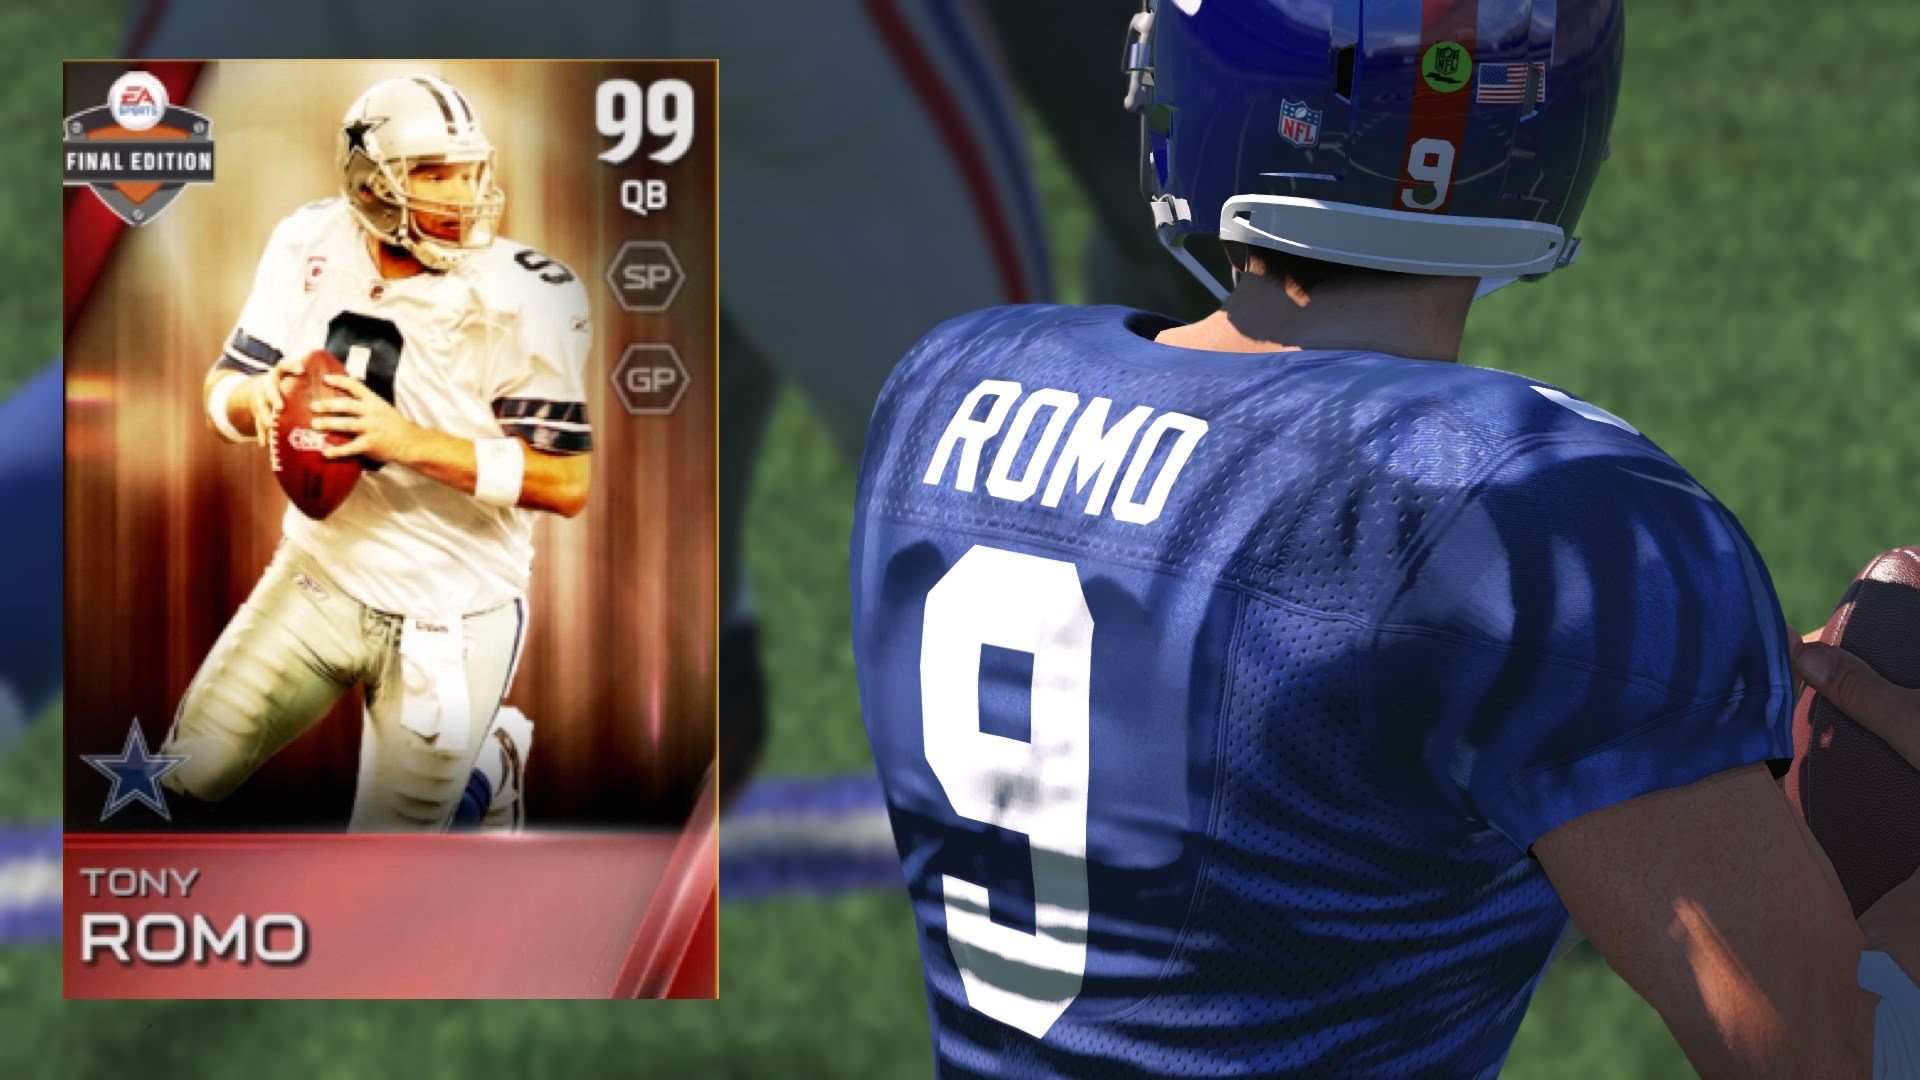 1920x1080 Madden NFL 15 Ultimate Team - FINAL EDITION TONY ROMO DEBUT! DON'T TEST THE  SECONDARY!